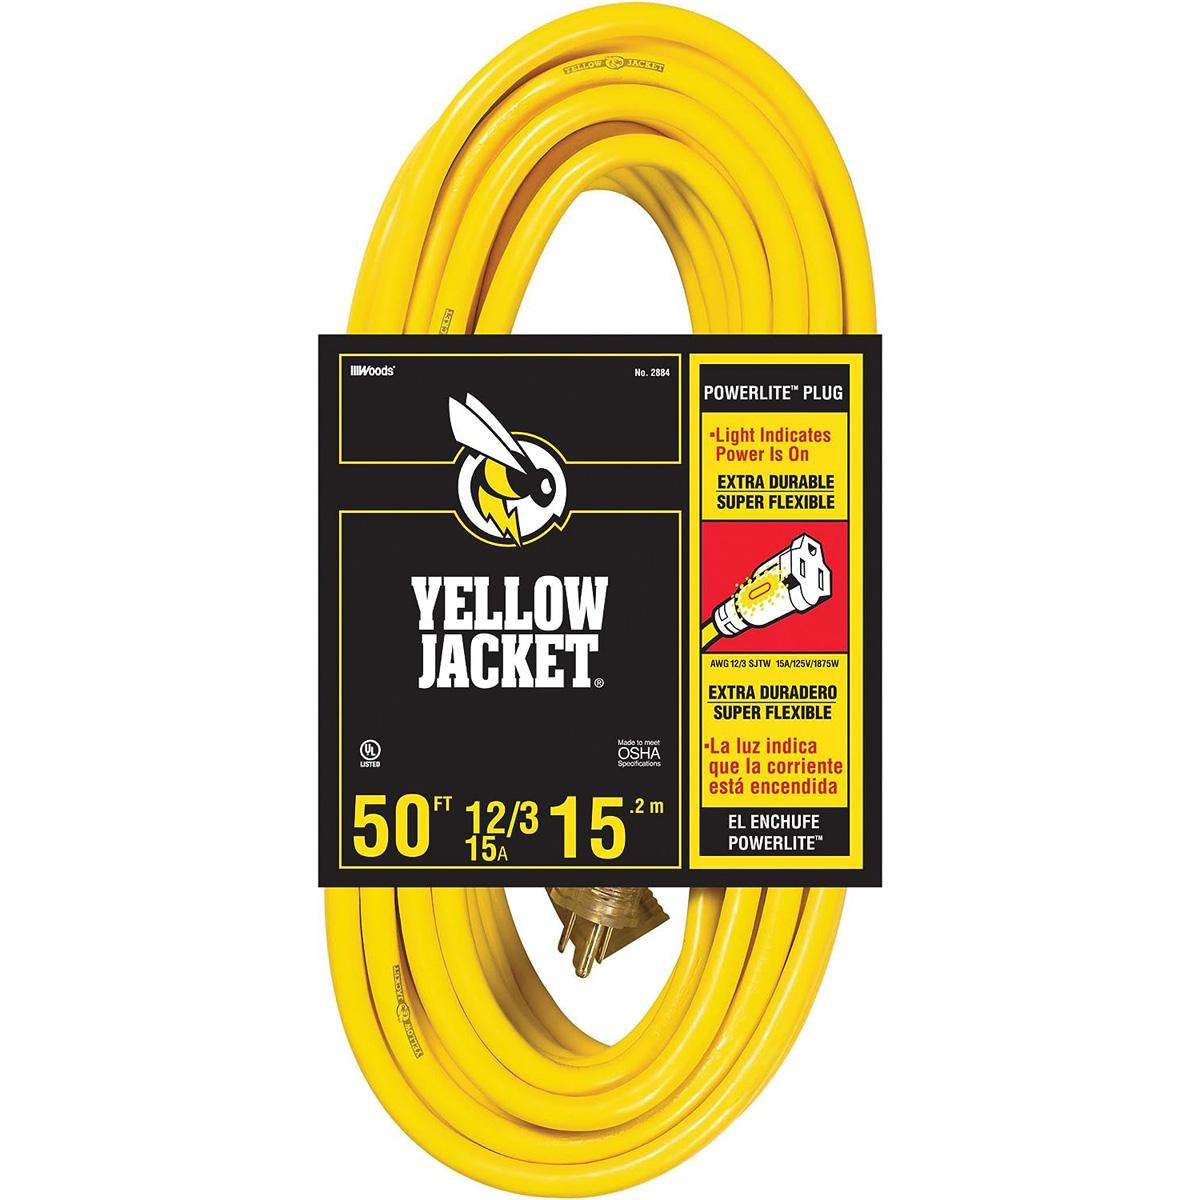 50ft Yellow Jacket 15-Amp UL Listed Extension Cord for $29.99